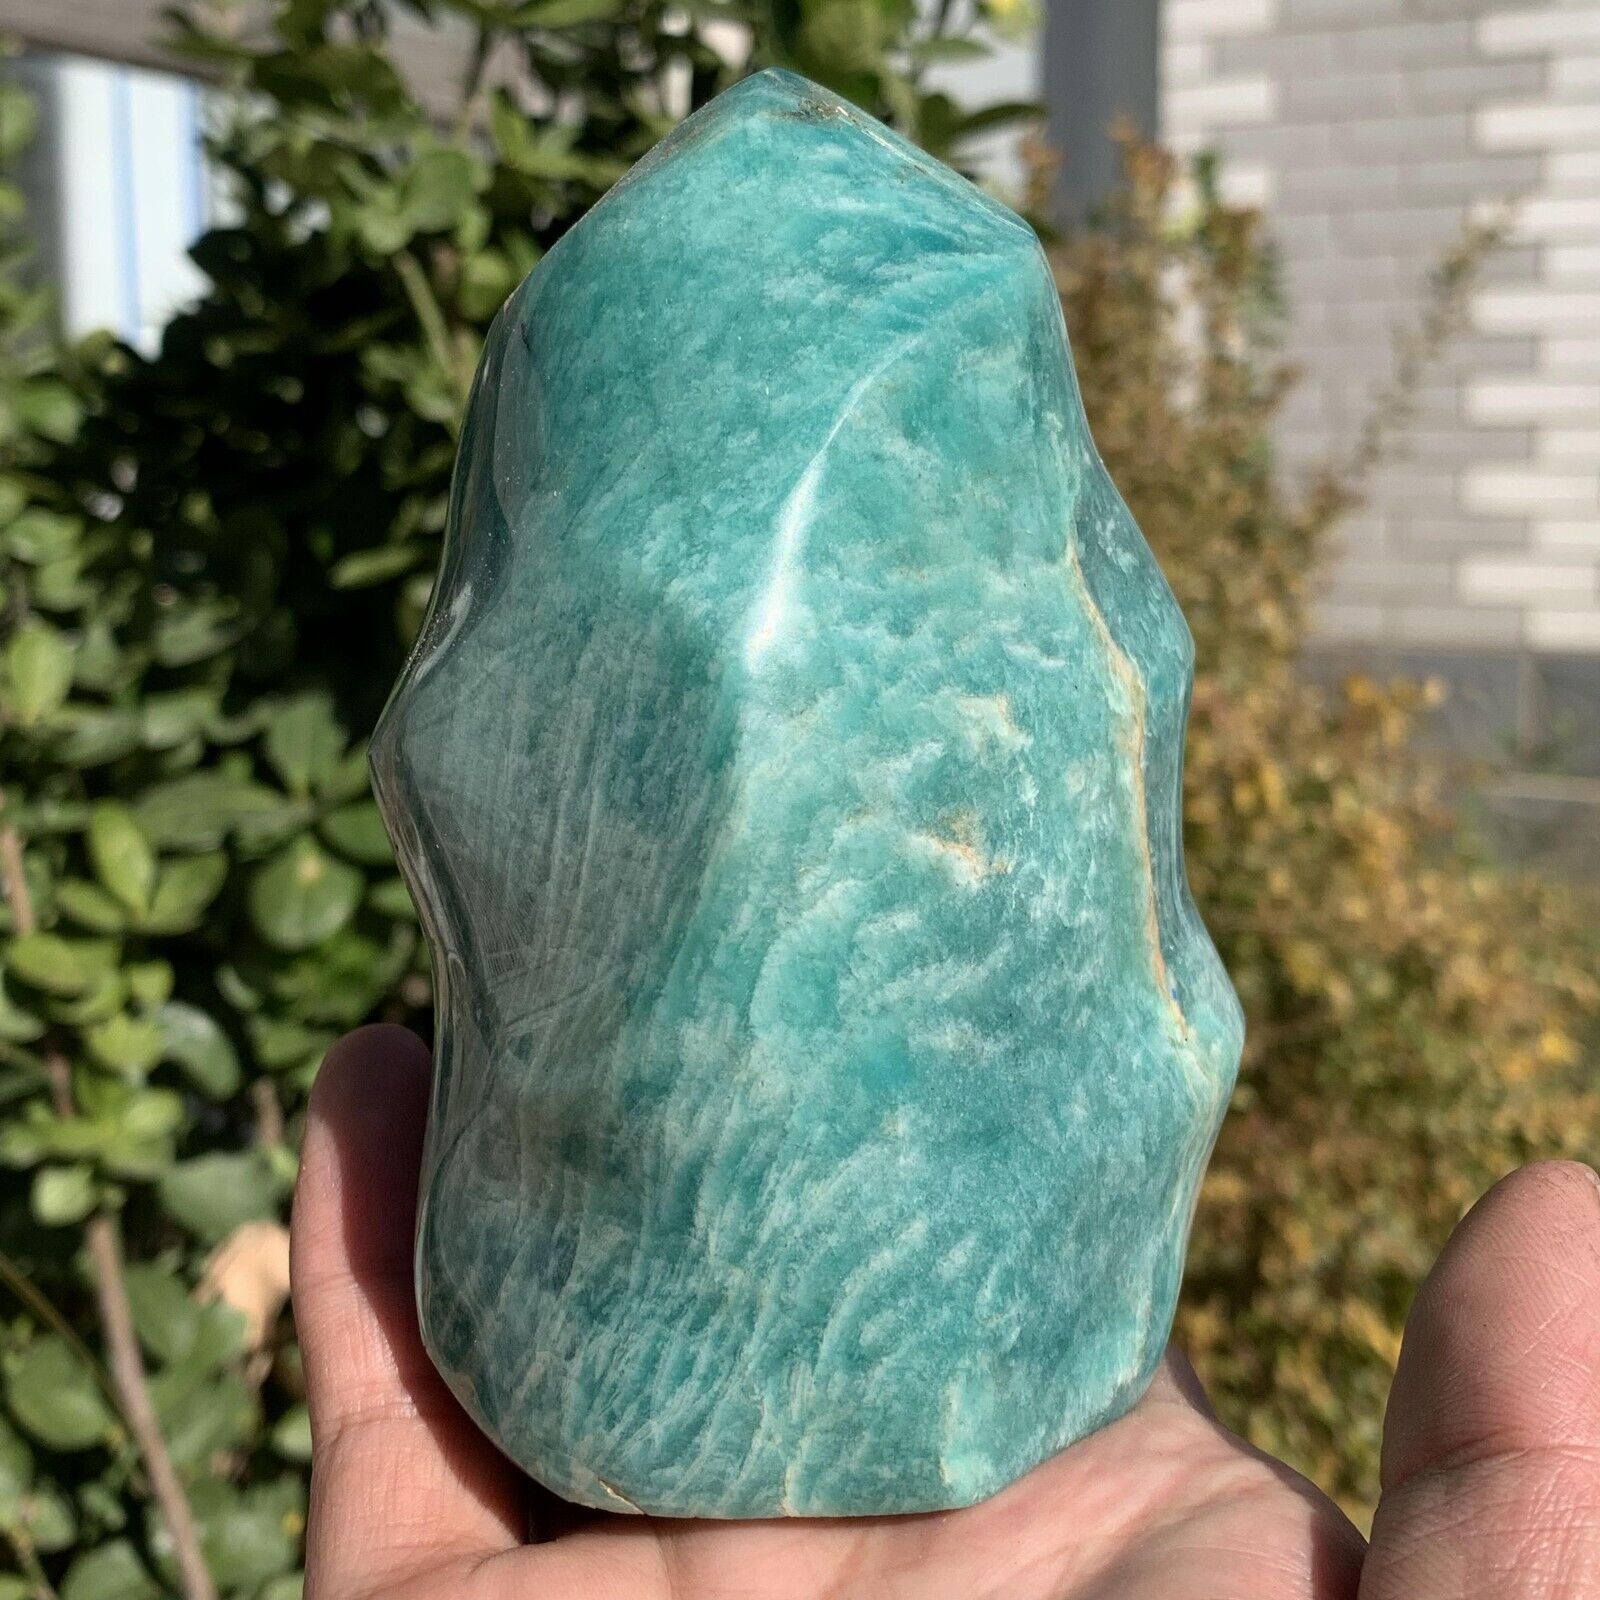 780g Natural Amazonite Flame Polished Torch Crystal Mineral Healing Gifts